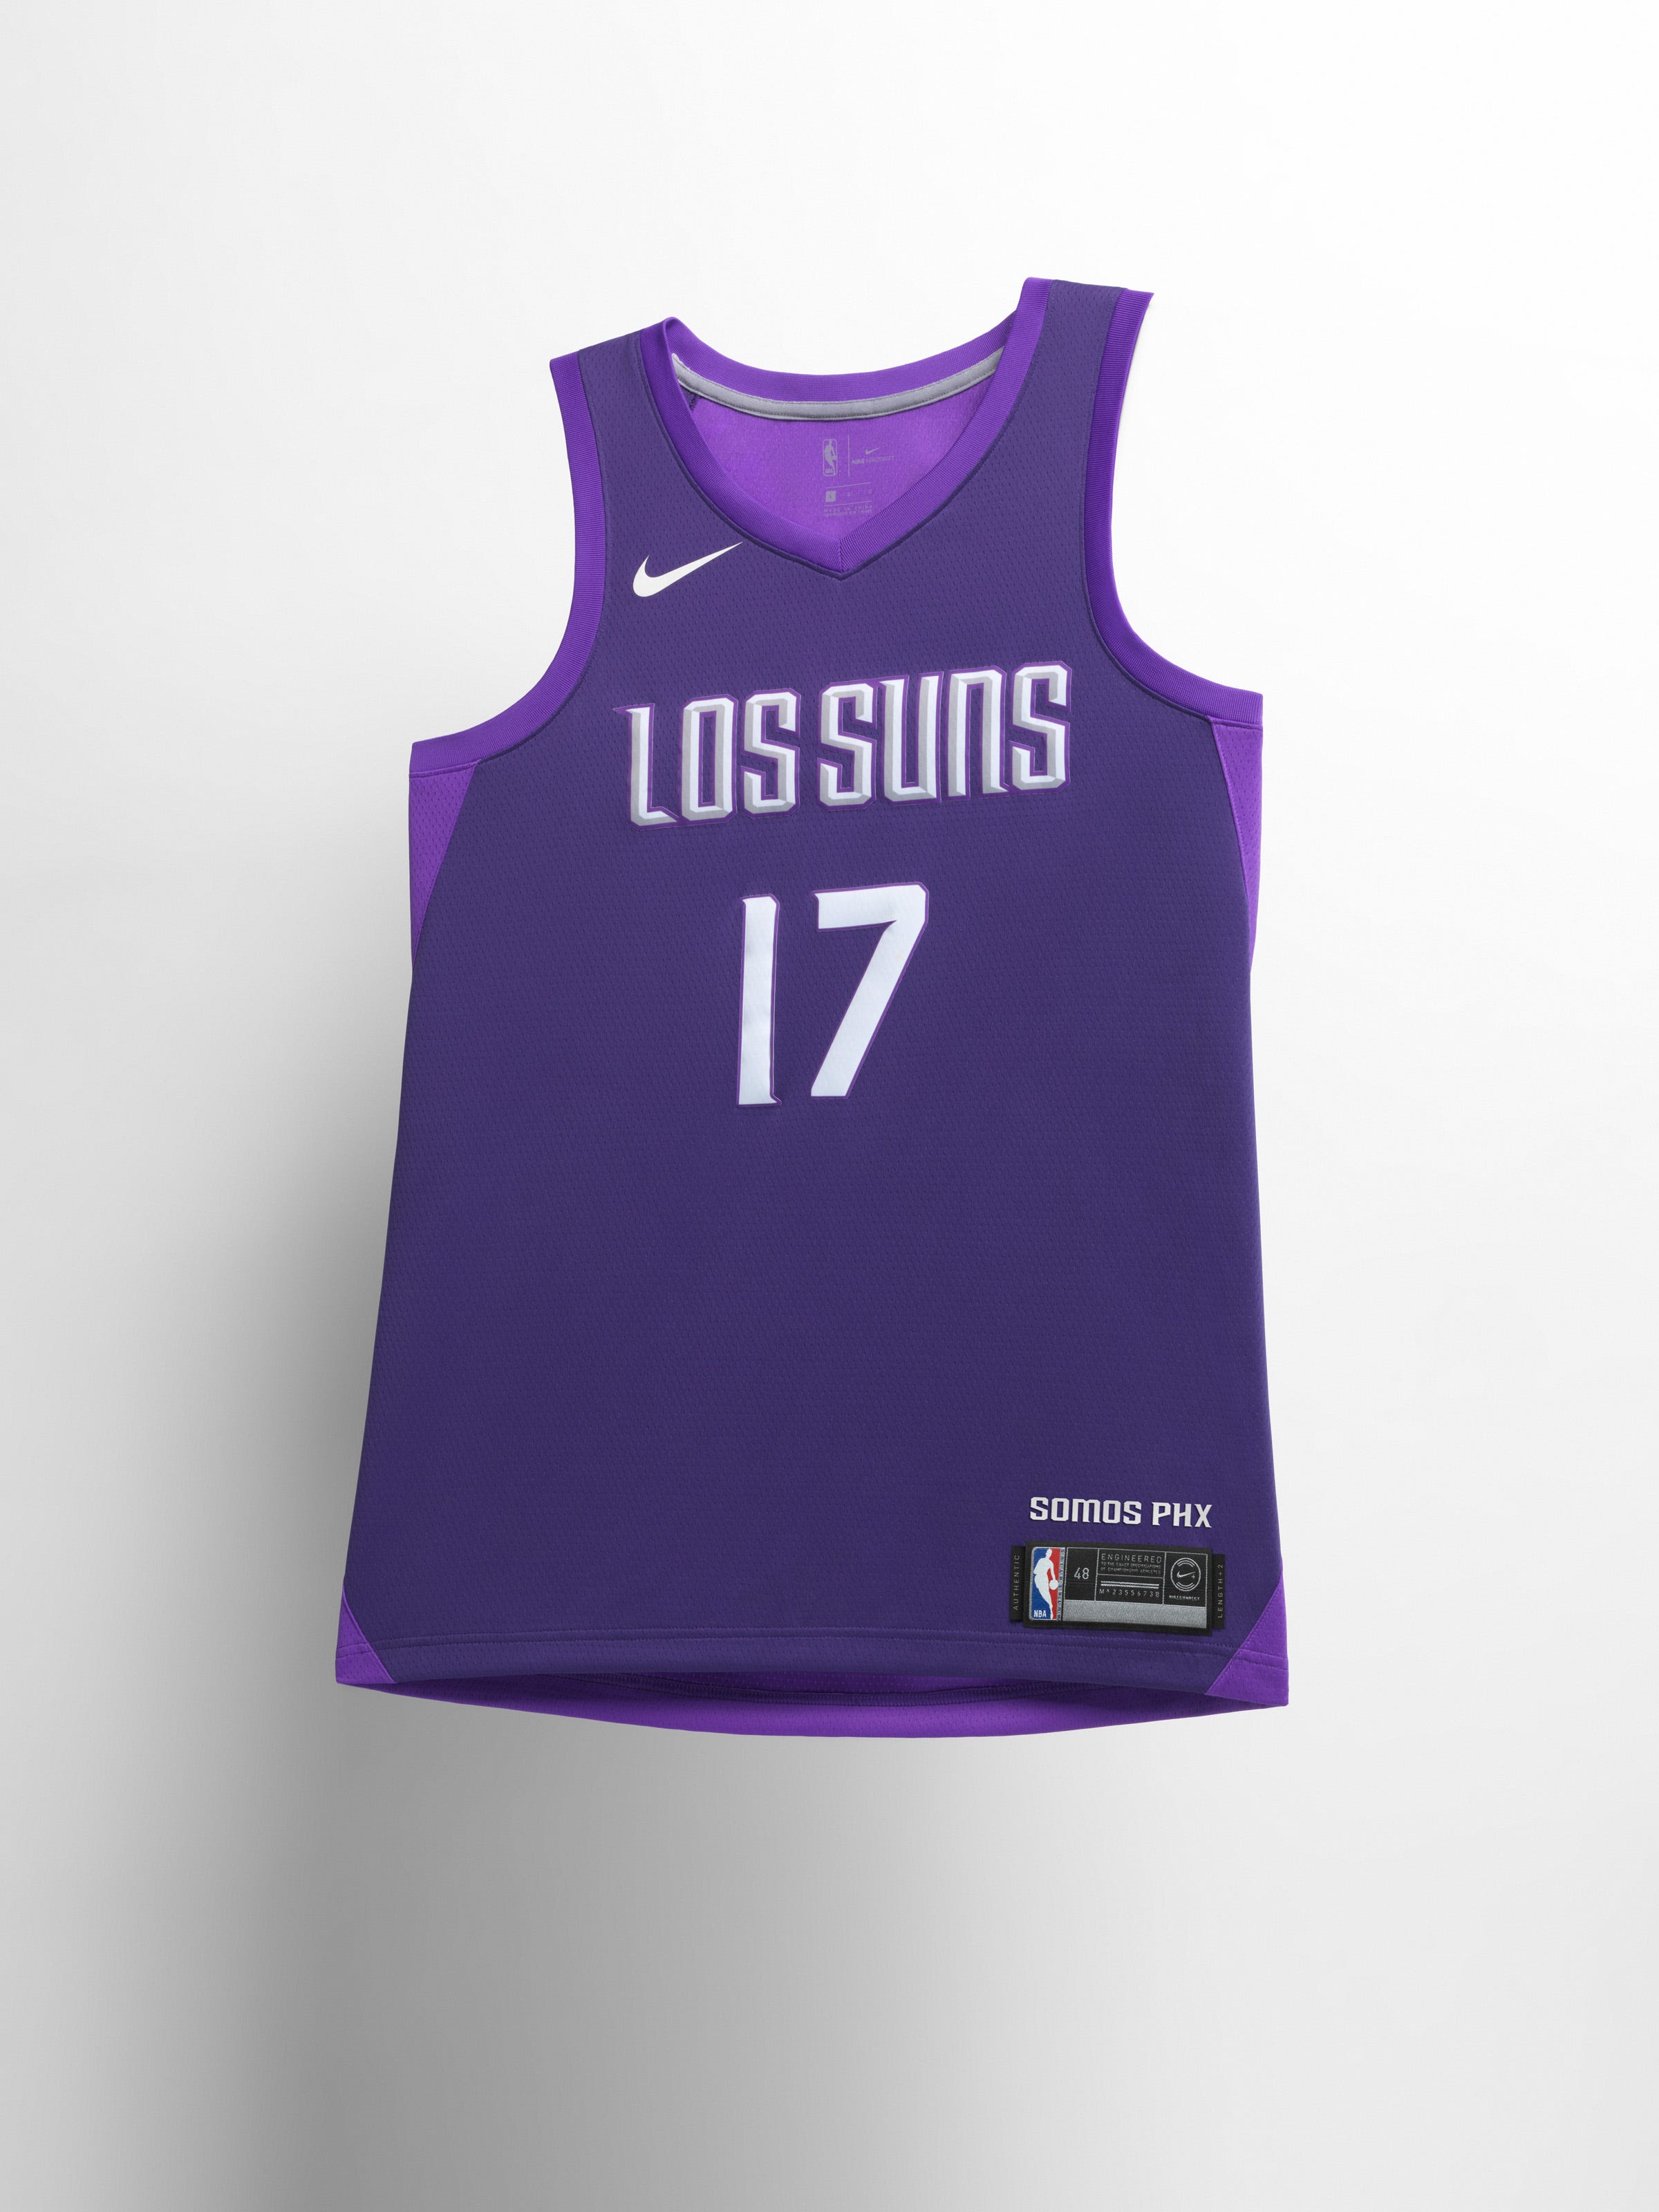 suns jersey numbers